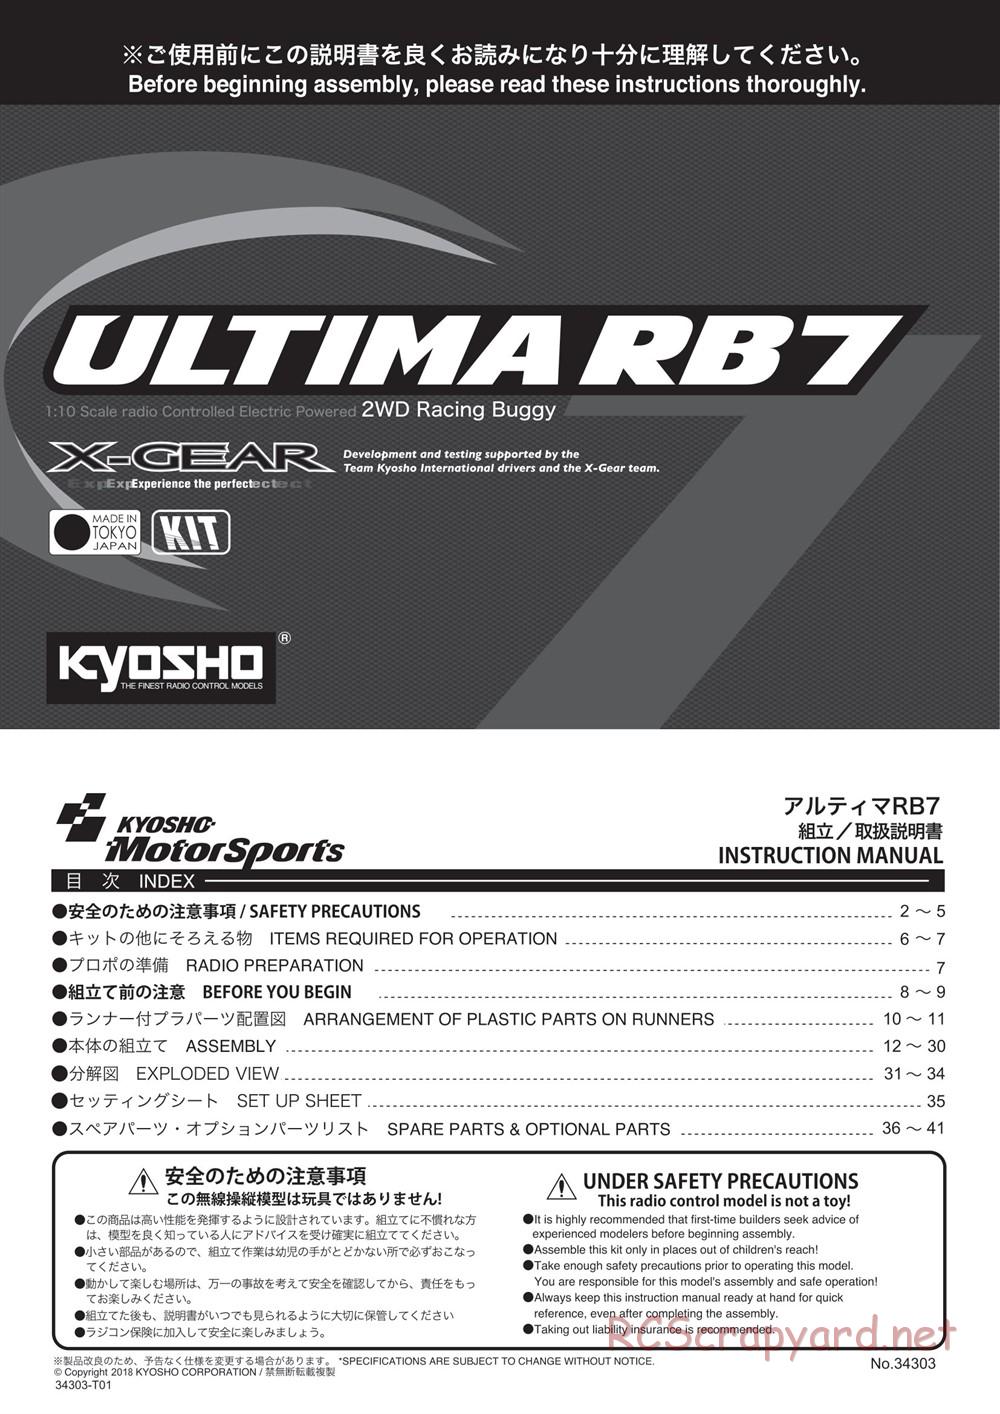 Kyosho - Ultima RB7 - Manual - Page 1